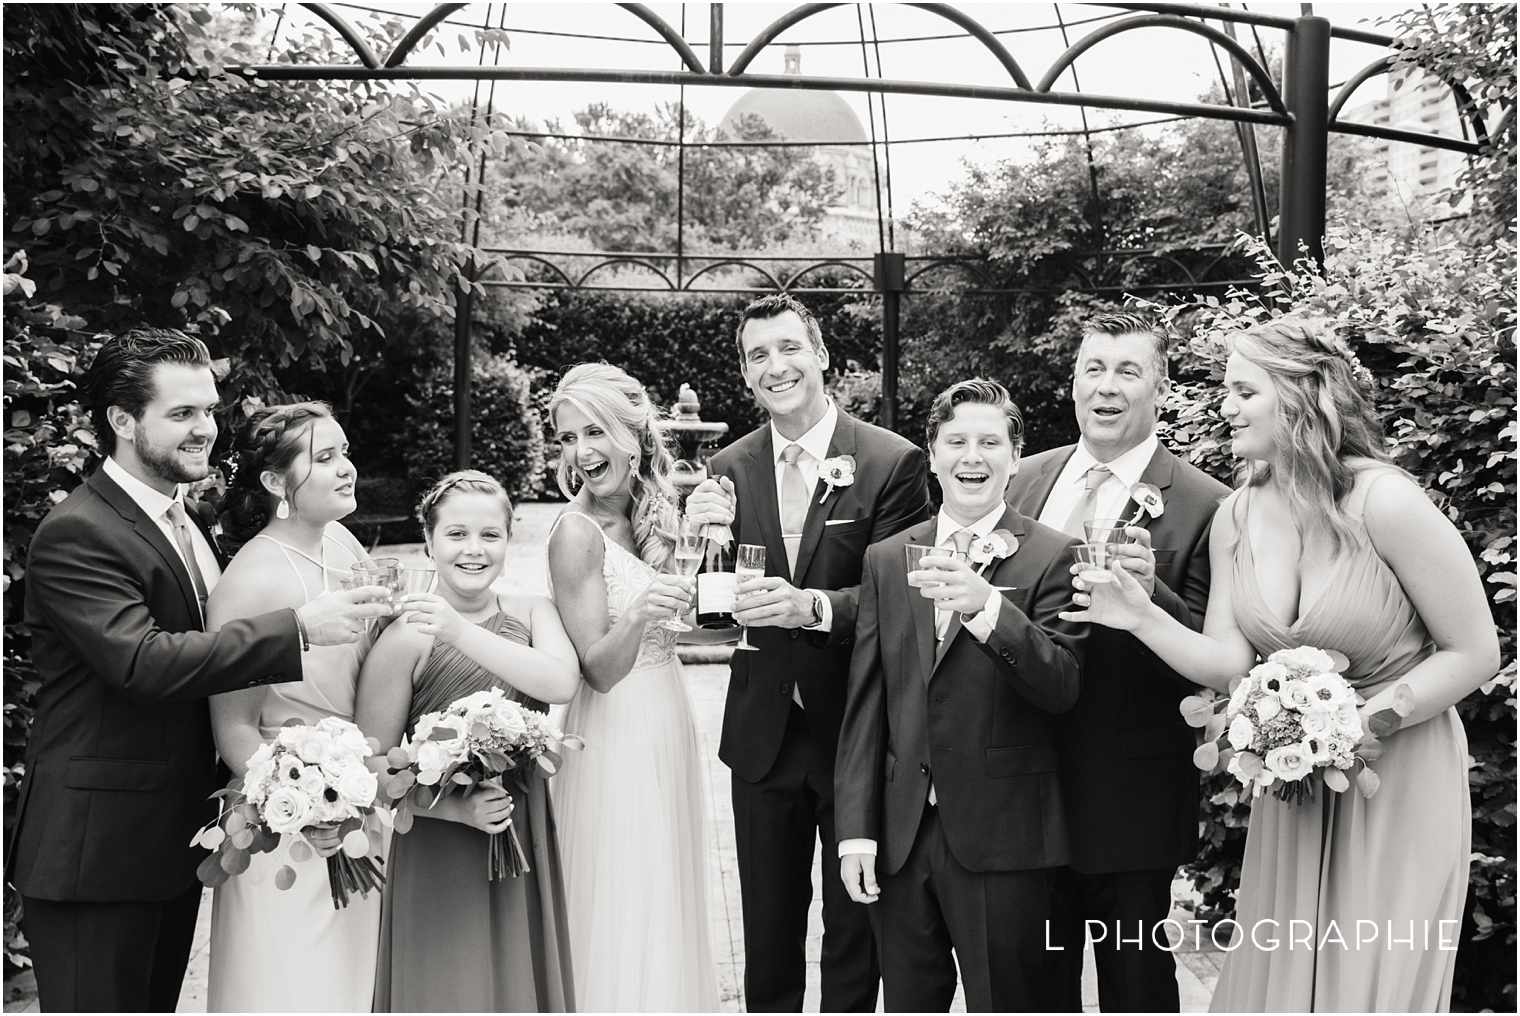 Central West End,Forest Park,June wedding,Kate Hayes,L Photographie,L Photographie weddings,Maronite Heritage Institute,Midwest wedding photographer,St. Louis wedding,St. Louis wedding photographer,St. Louis wedding photography,St. Raymond's Maronite Cathedral,Taylor Park,lavender bridesmaid dress,purple bridesmaid dress,summer wedding,wedding photos at the Muny,